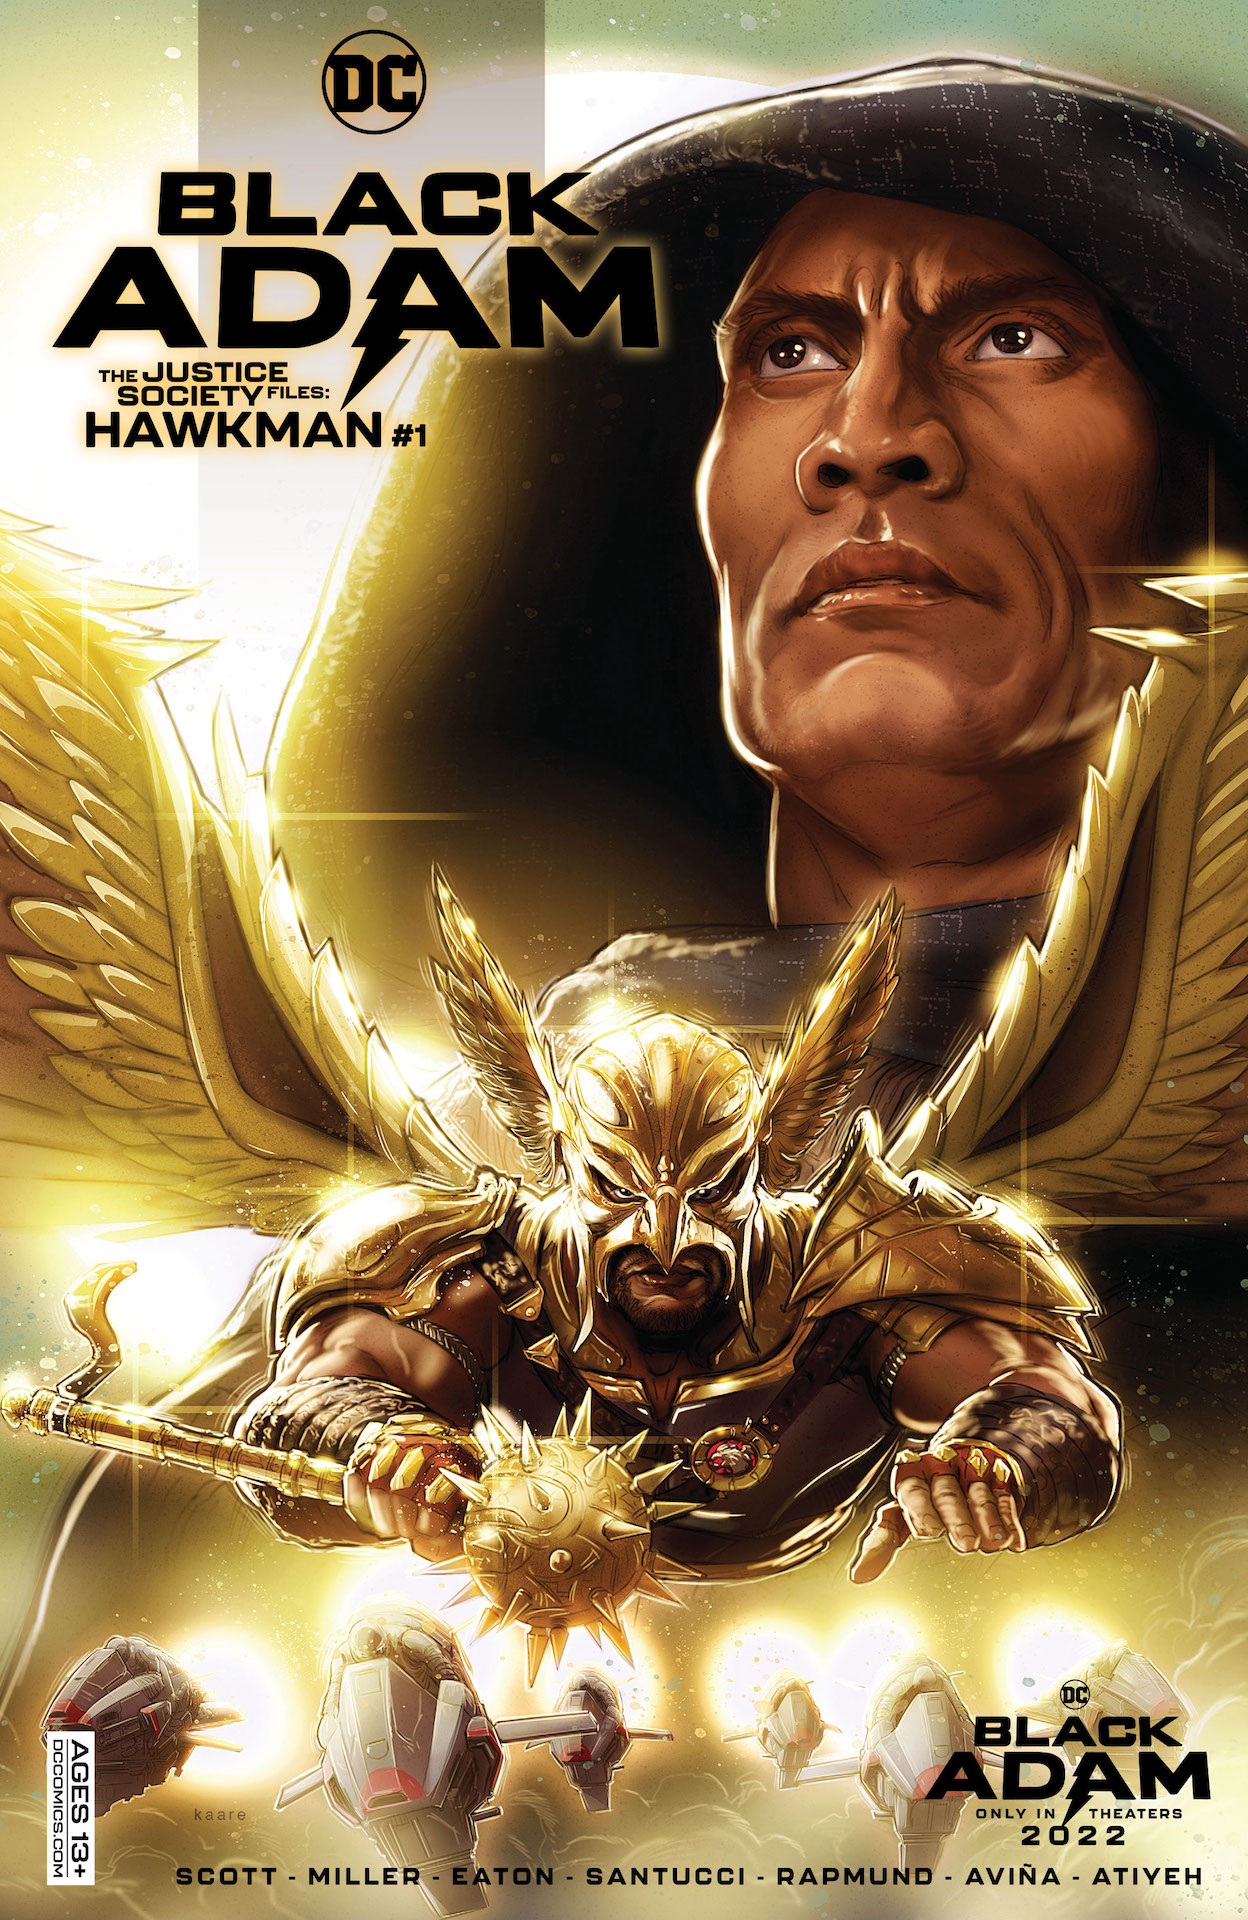 DC Preview: Black Adam – The Justice Society Files: Hawkman #1